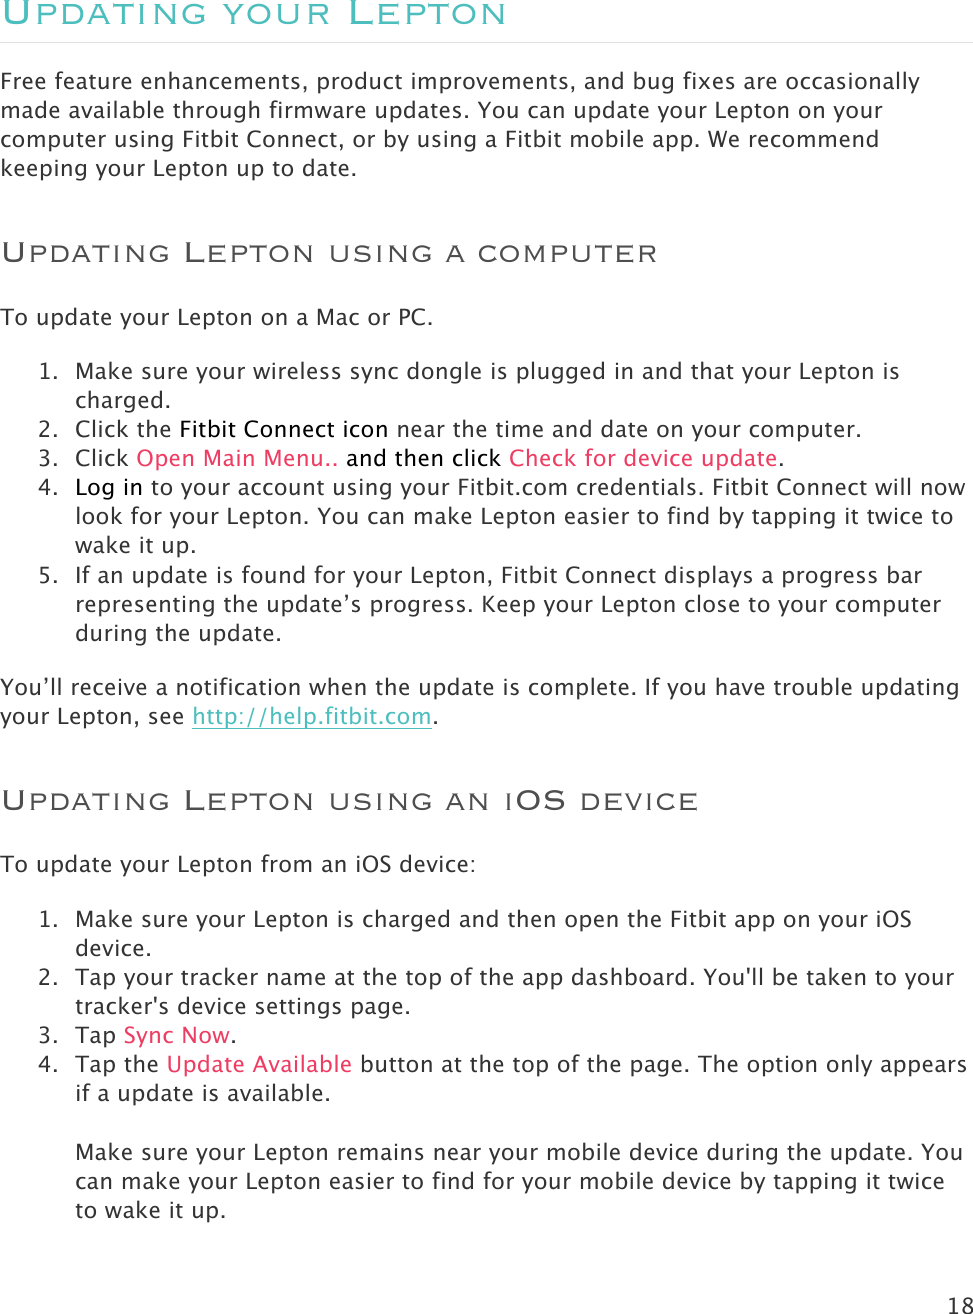 18   Updating your Lepton Free feature enhancements, product improvements, and bug fixes are occasionally made available through firmware updates. You can update your Lepton on your computer using Fitbit Connect, or by using a Fitbit mobile app. We recommend keeping your Lepton up to date. Updating Lepton using a computer To update your Lepton on a Mac or PC.  1. Make sure your wireless sync dongle is plugged in and that your Lepton is charged. 2. Click the Fitbit Connect icon near the time and date on your computer.  3. Click Open Main Menu.. and then click Check for device update. 4. Log in to your account using your Fitbit.com credentials. Fitbit Connect will now look for your Lepton. You can make Lepton easier to find by tapping it twice to wake it up. 5. If an update is found for your Lepton, Fitbit Connect displays a progress bar representing the update’s progress. Keep your Lepton close to your computer during the update.   You’ll receive a notification when the update is complete. If you have trouble updating your Lepton, see http://help.fitbit.com. Updating Lepton using an iOS device To update your Lepton from an iOS device: 1. Make sure your Lepton is charged and then open the Fitbit app on your iOS device.  2. Tap your tracker name at the top of the app dashboard. You&apos;ll be taken to your tracker&apos;s device settings page. 3. Tap Sync Now. 4. Tap the Update Available button at the top of the page. The option only appears if a update is available.   Make sure your Lepton remains near your mobile device during the update. You can make your Lepton easier to find for your mobile device by tapping it twice to wake it up. 